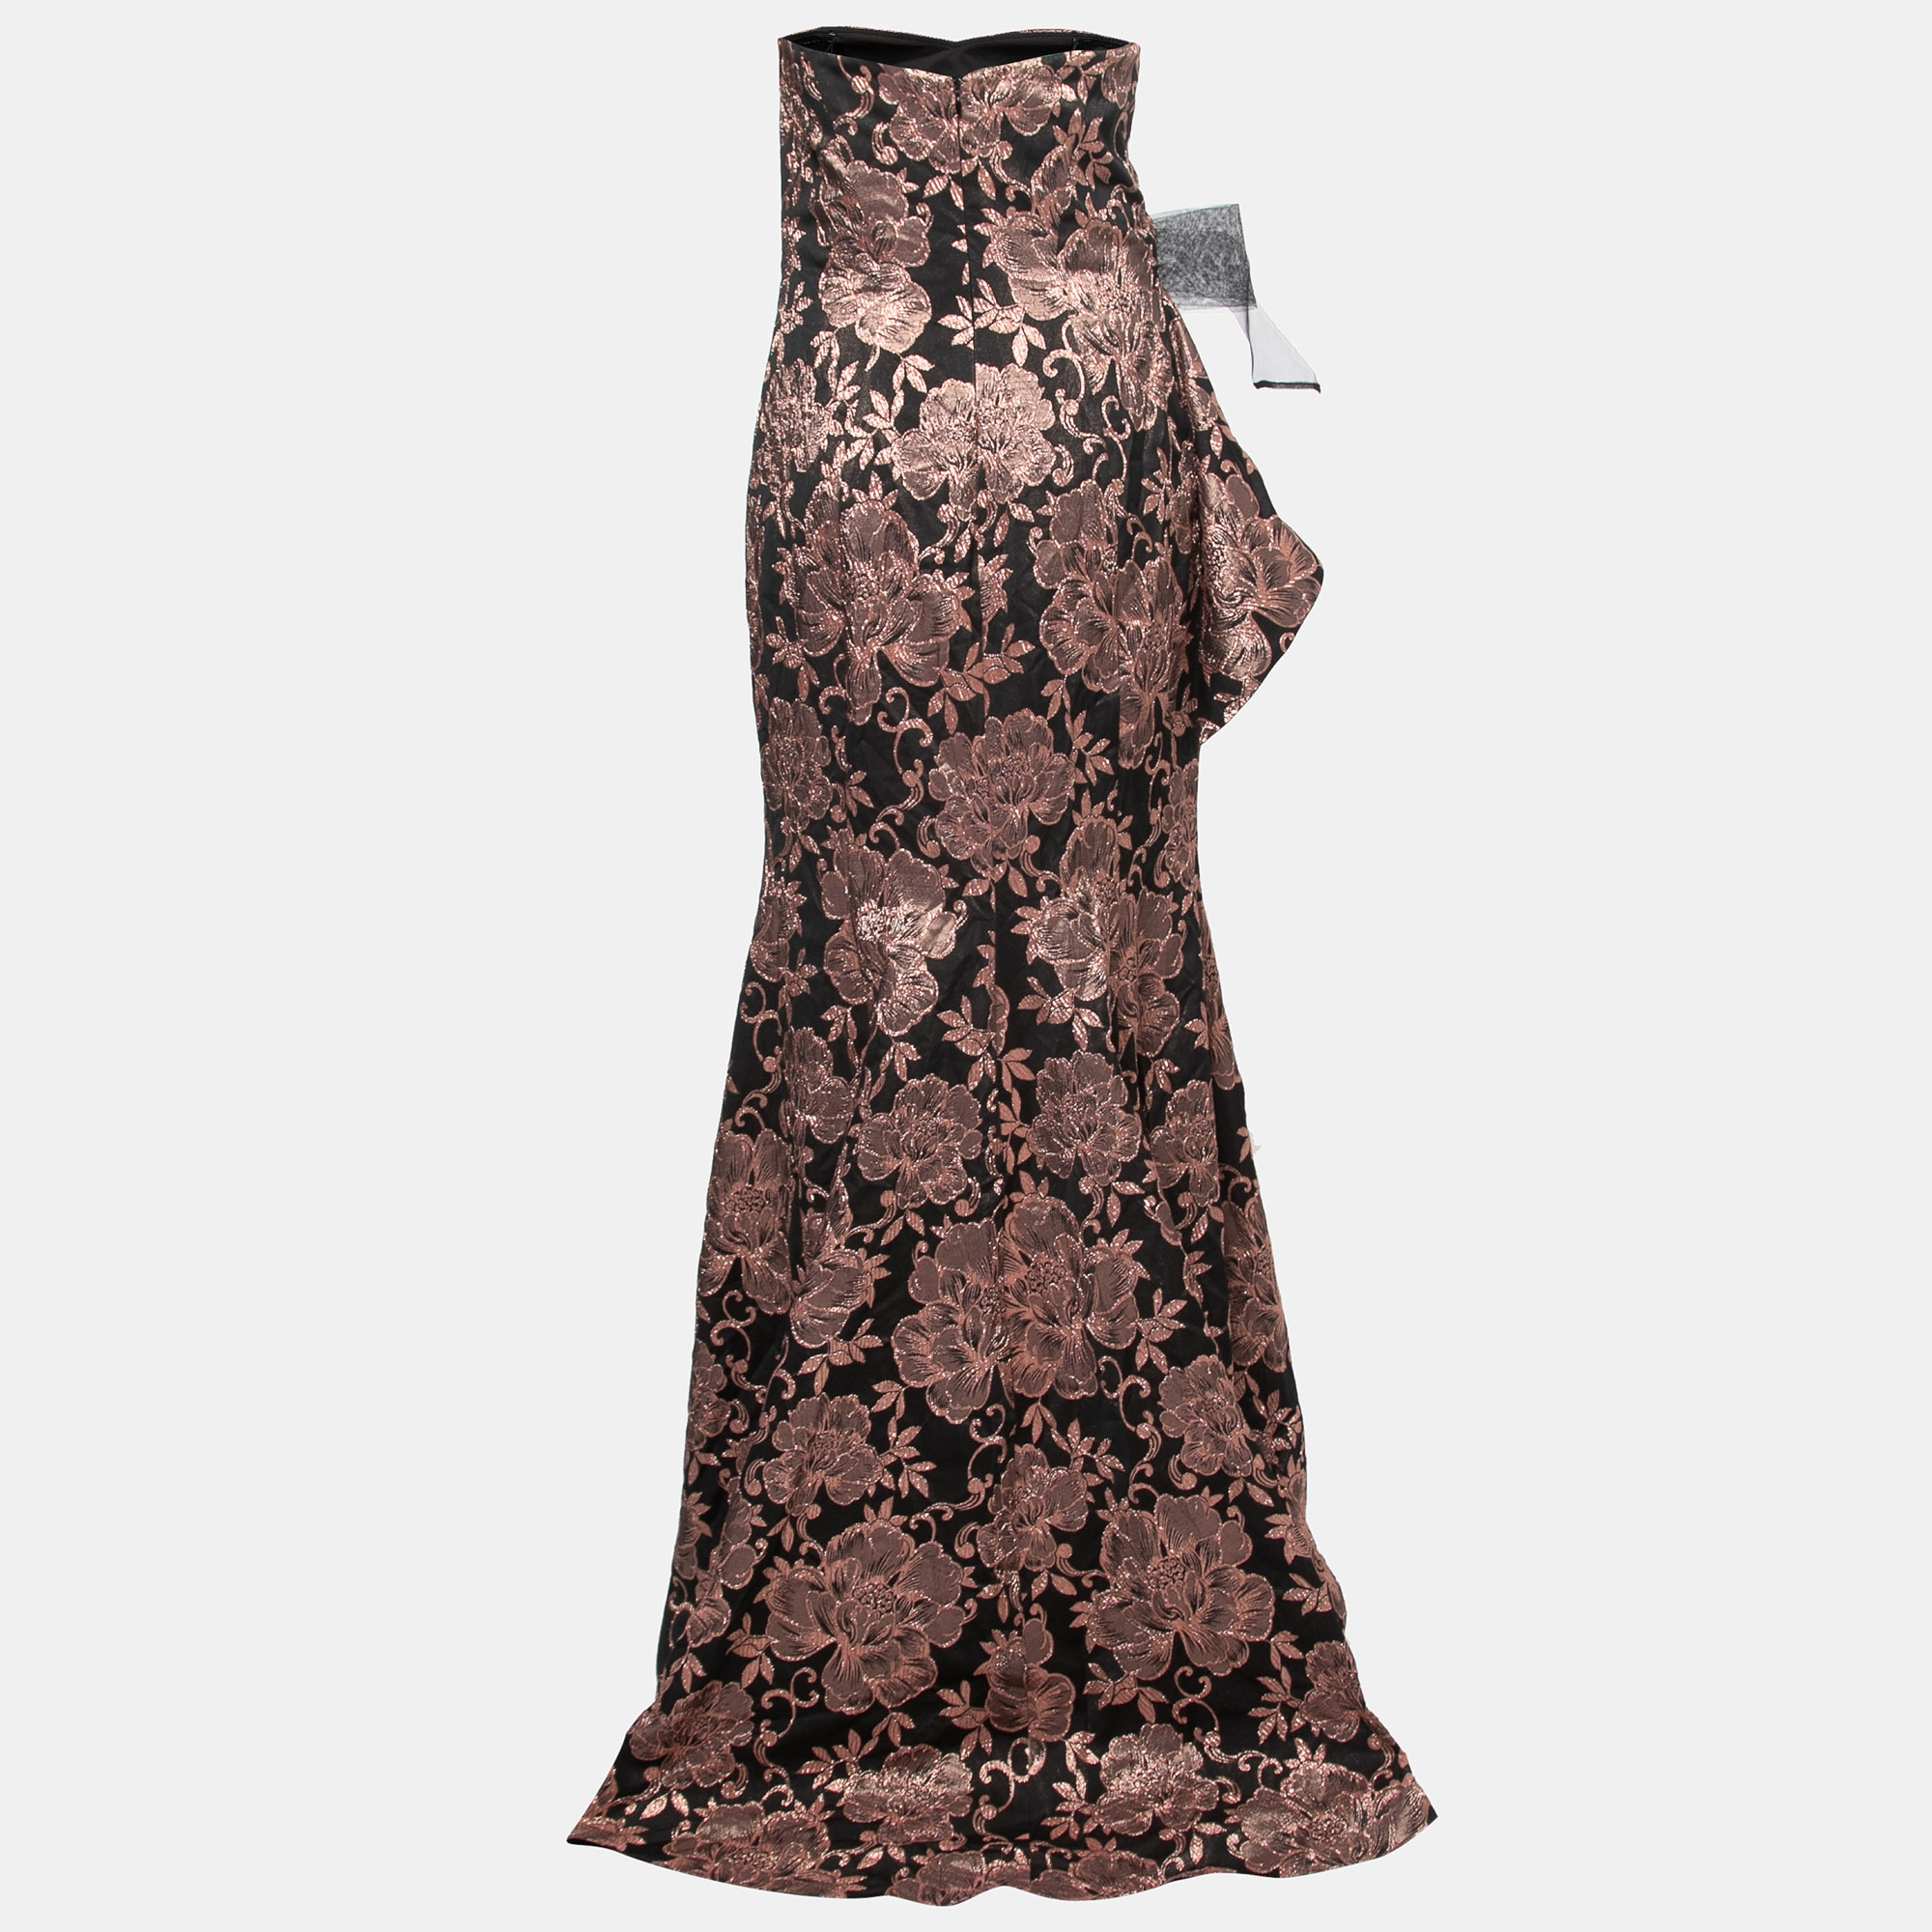 

Badgley Mischka Couture Metallic Floral Jacquard Embellished Strapless Gown